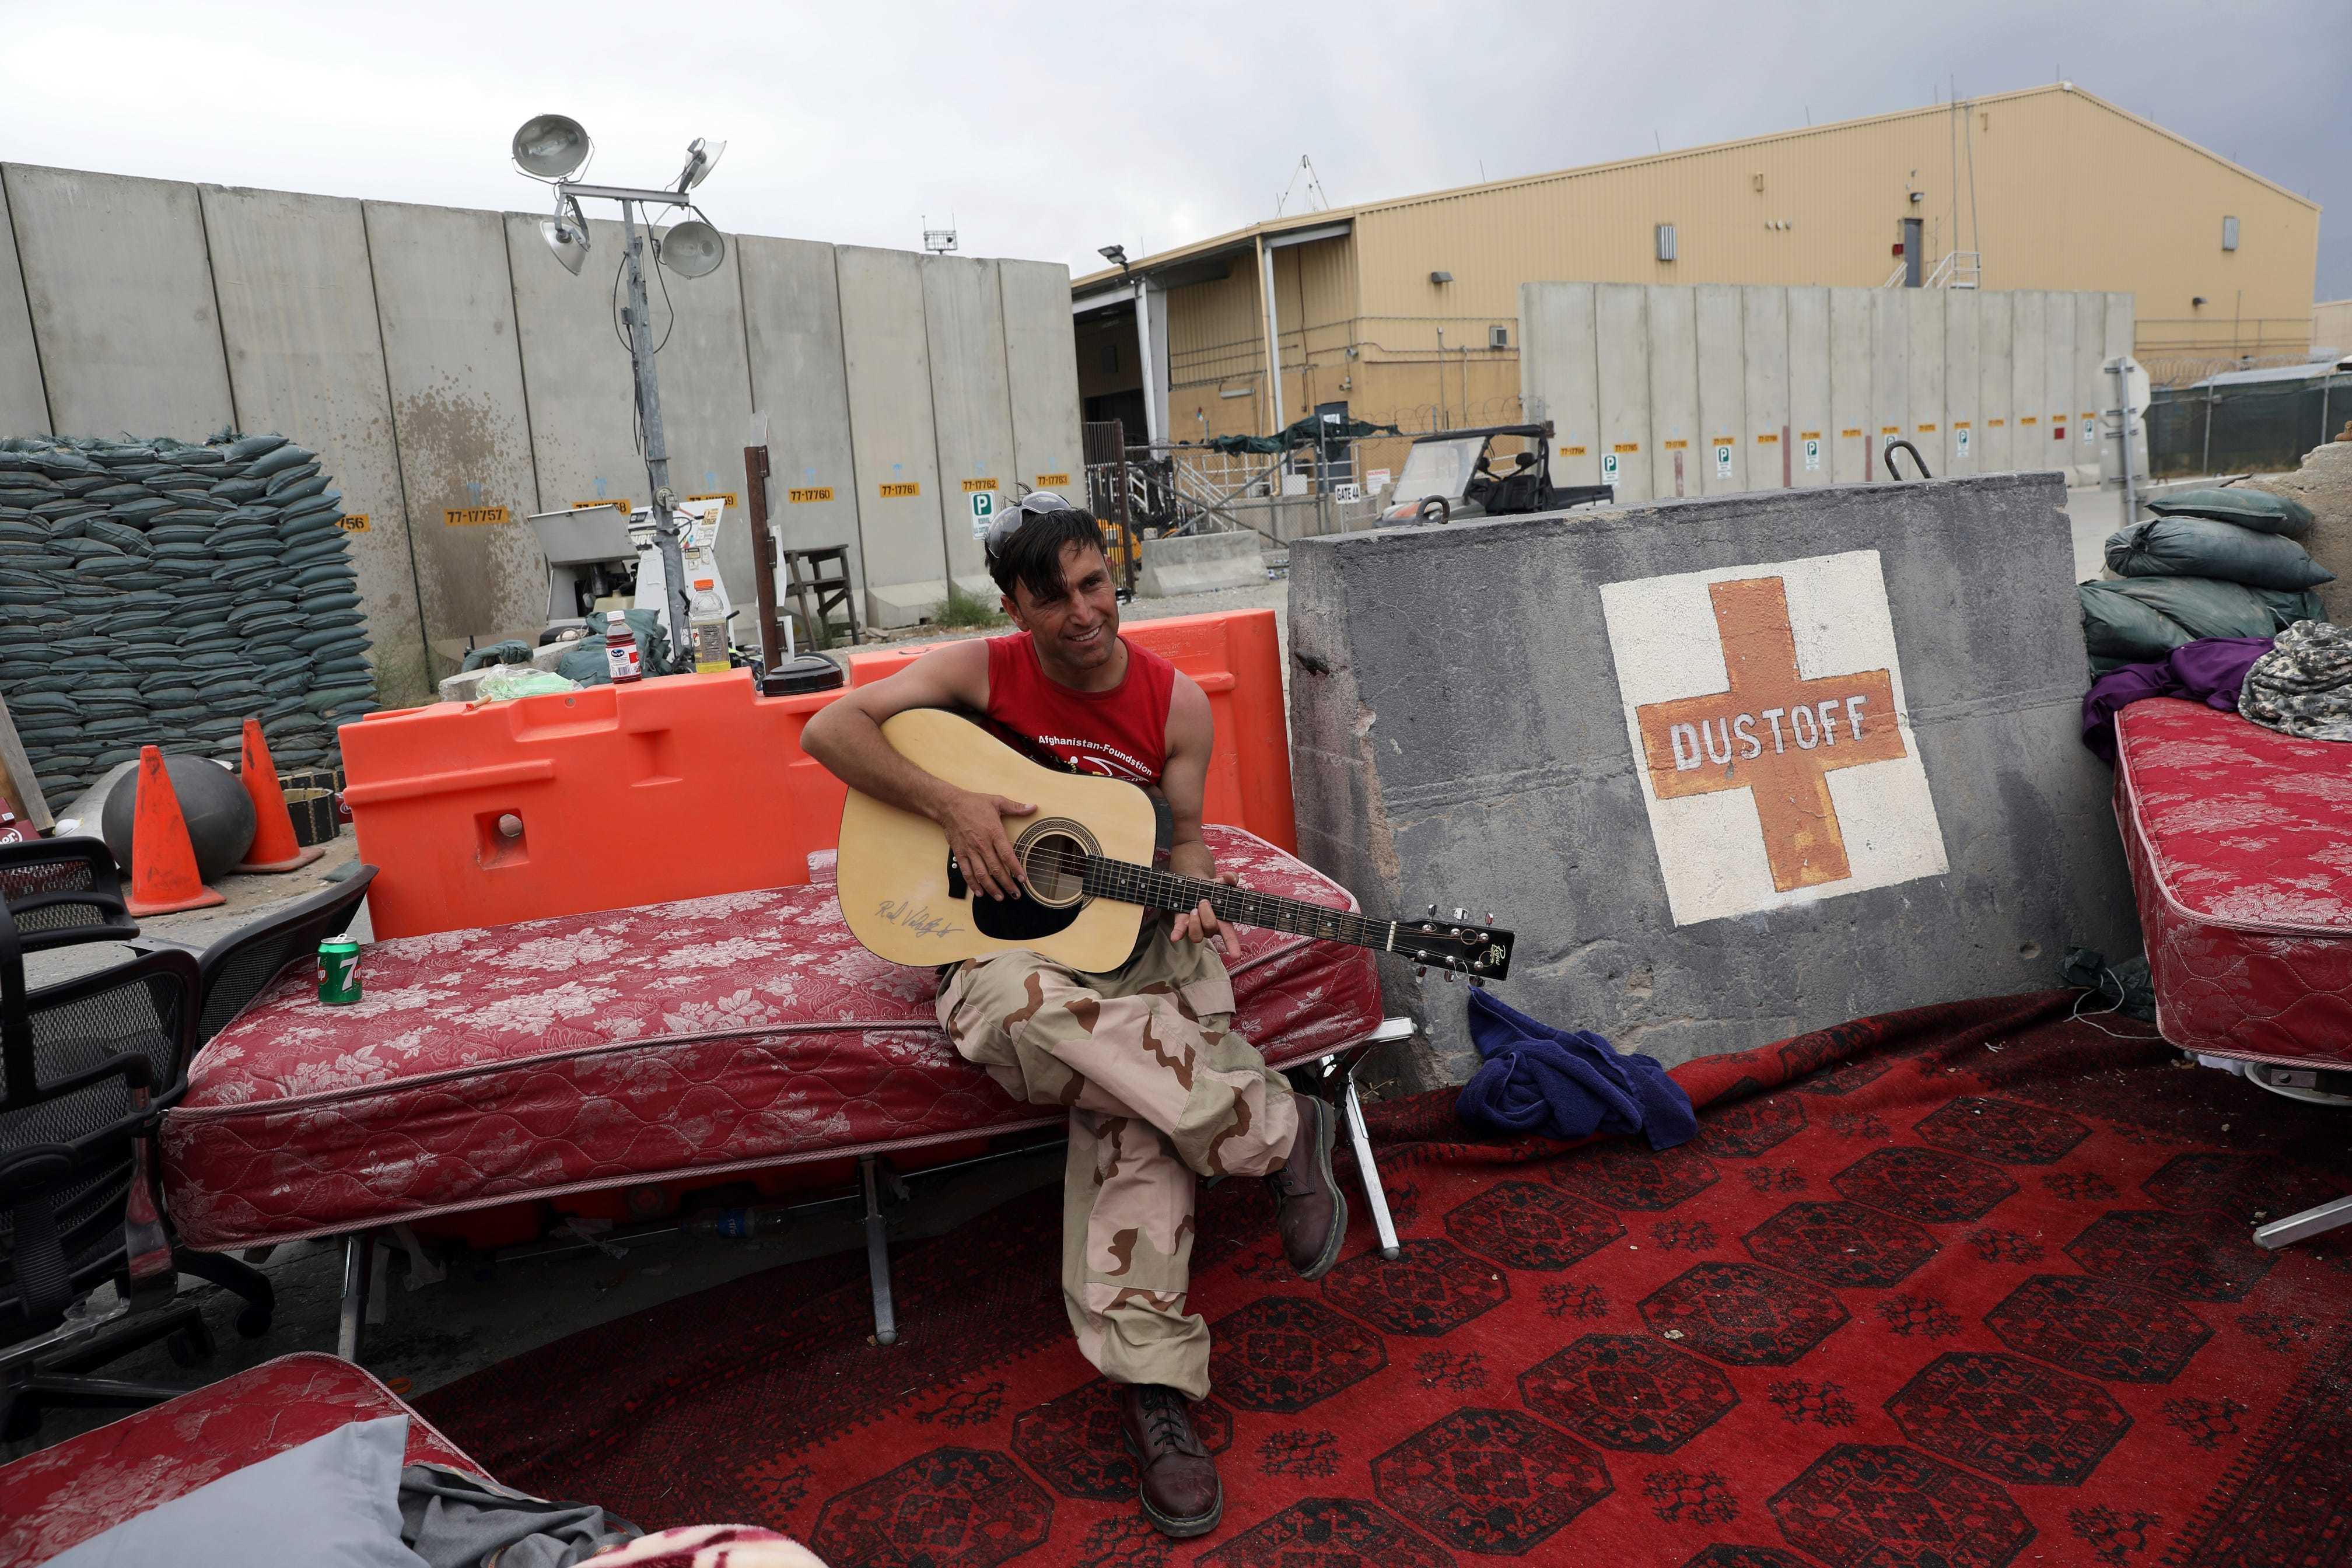 An Afghan soldier sitting on a red mattress plays a guitar.